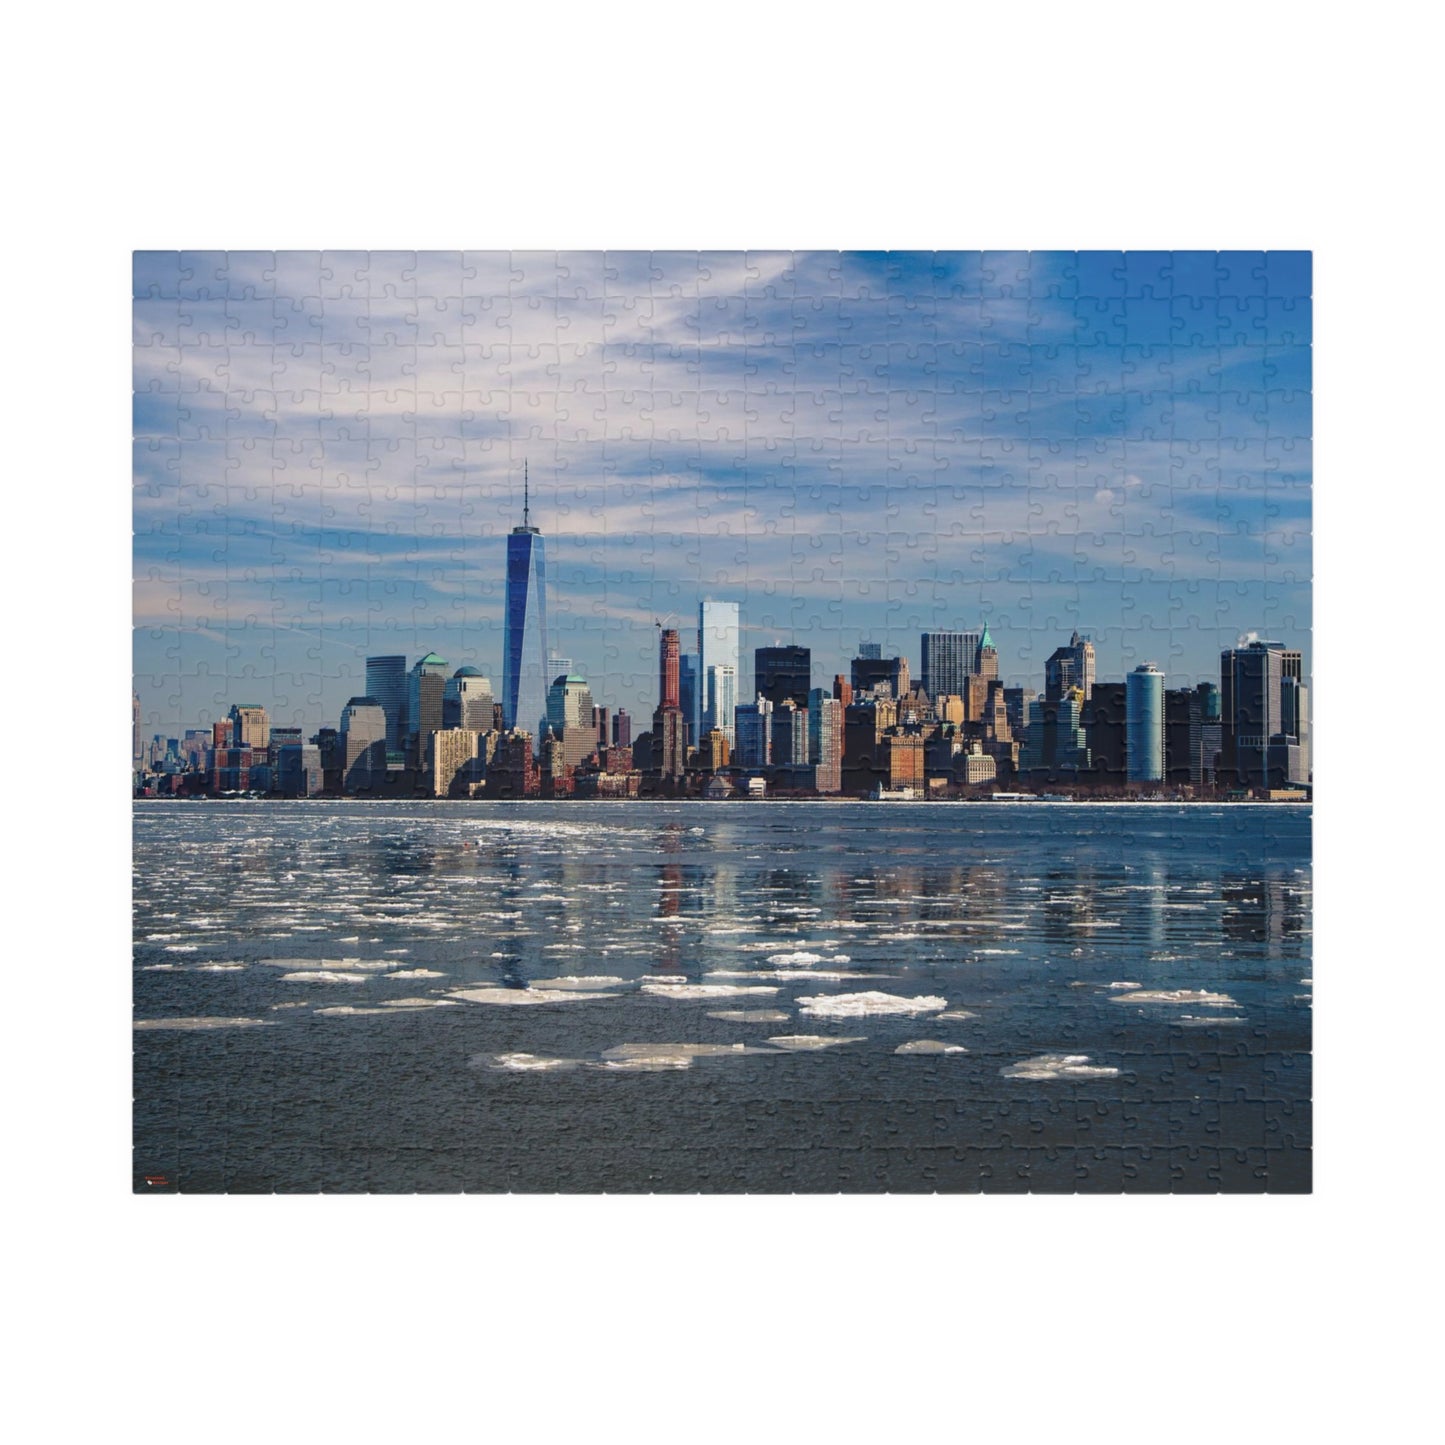 NYC Freedom Tower Puzzle (110, 252, 520, 1014-piece) New York Cityscape Harbor Skyline 1000 Piece Jig Saw Arch Empire City The Big Apple